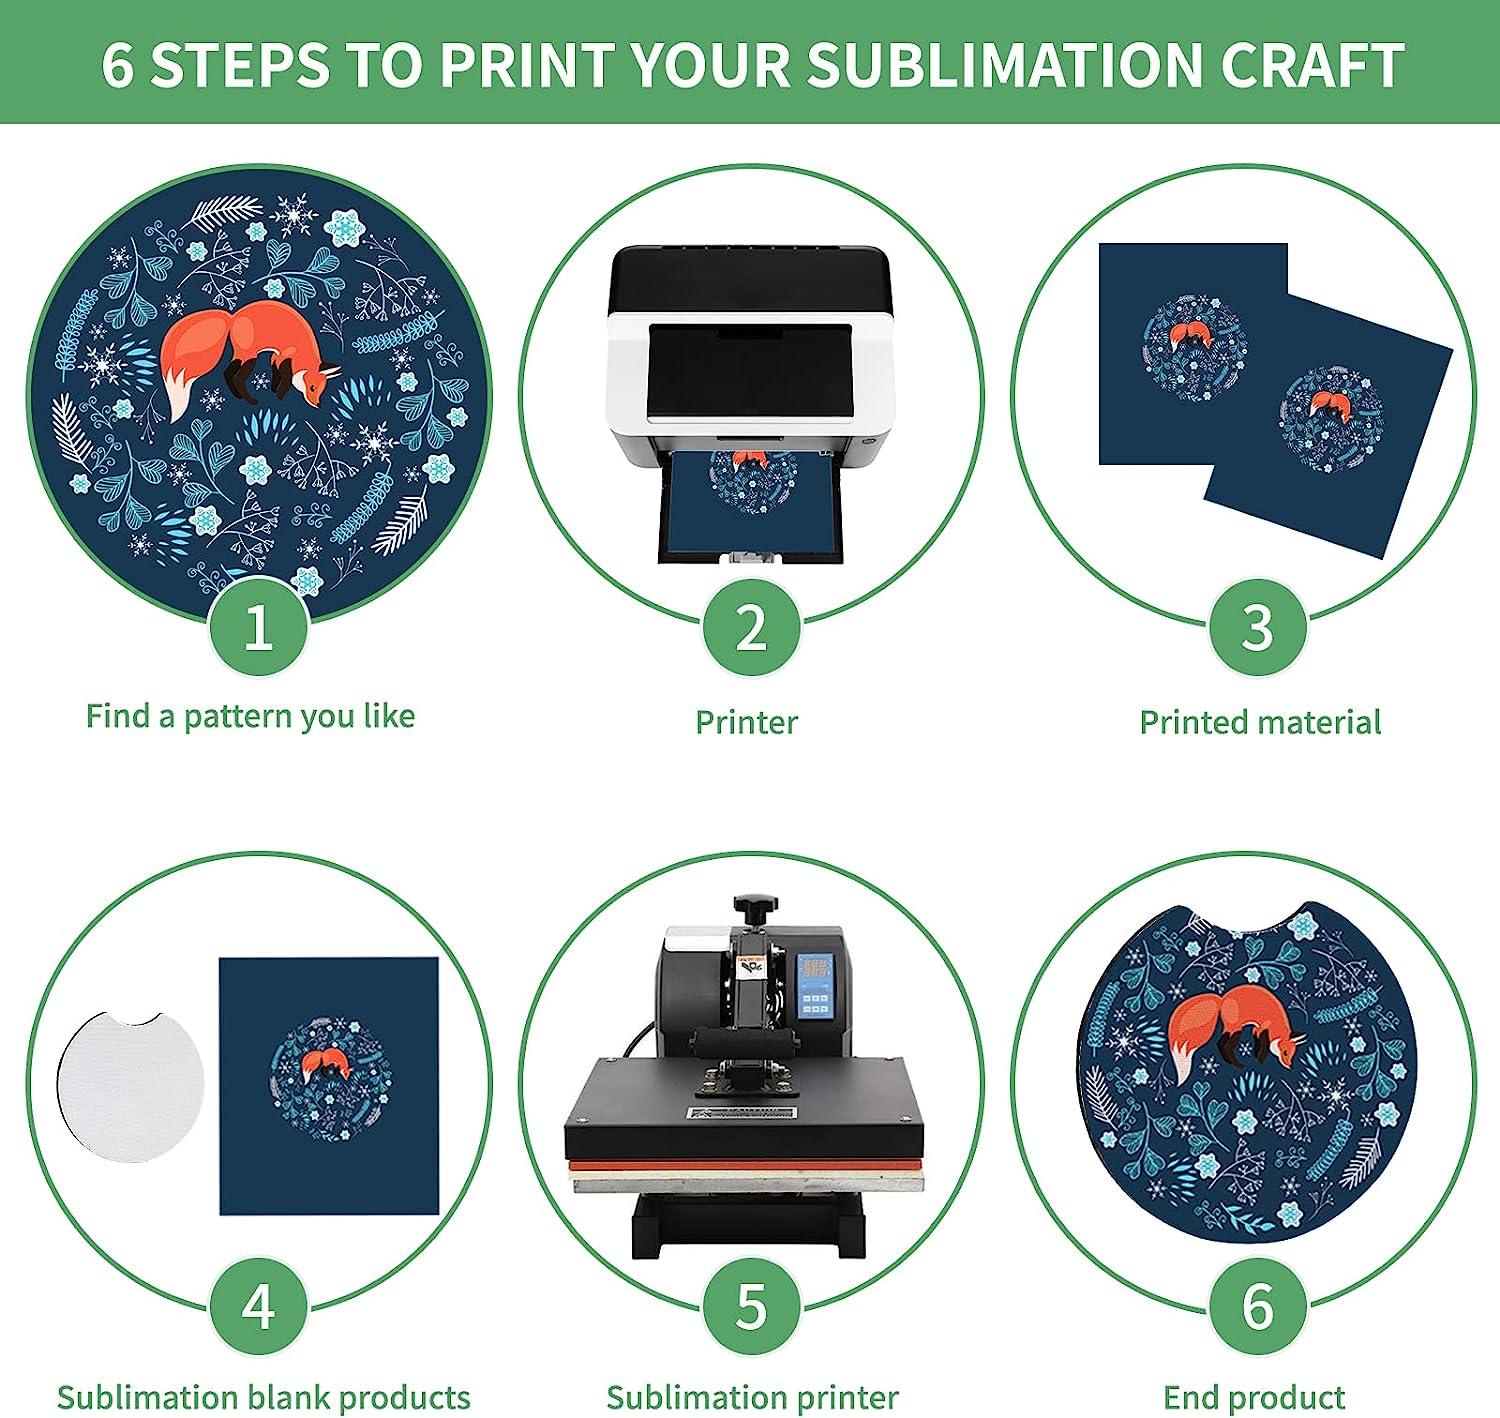 Sublimation Printers, Materials & Blanks